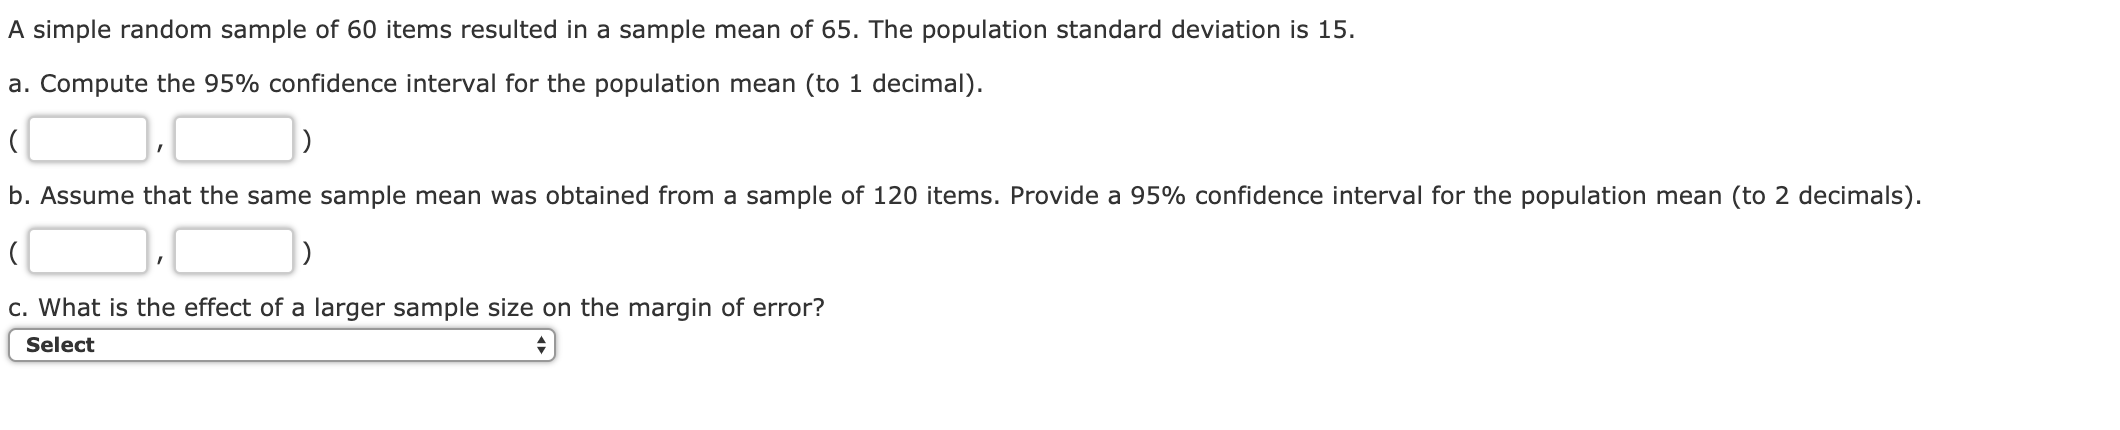 A simple random sample of 60 items resulted in a sample mean of 65. The population standard deviation is 15
a. Compute the 95% confidence interval for the population mean (to 1 decimal).
b. Assume that the same sample mean was obtained from a sample of 120 items. Provide a 95% confidence interval for the population mean (to 2 decimals)
c. What is the effect of a larger sample size on the margin of error?
Select
